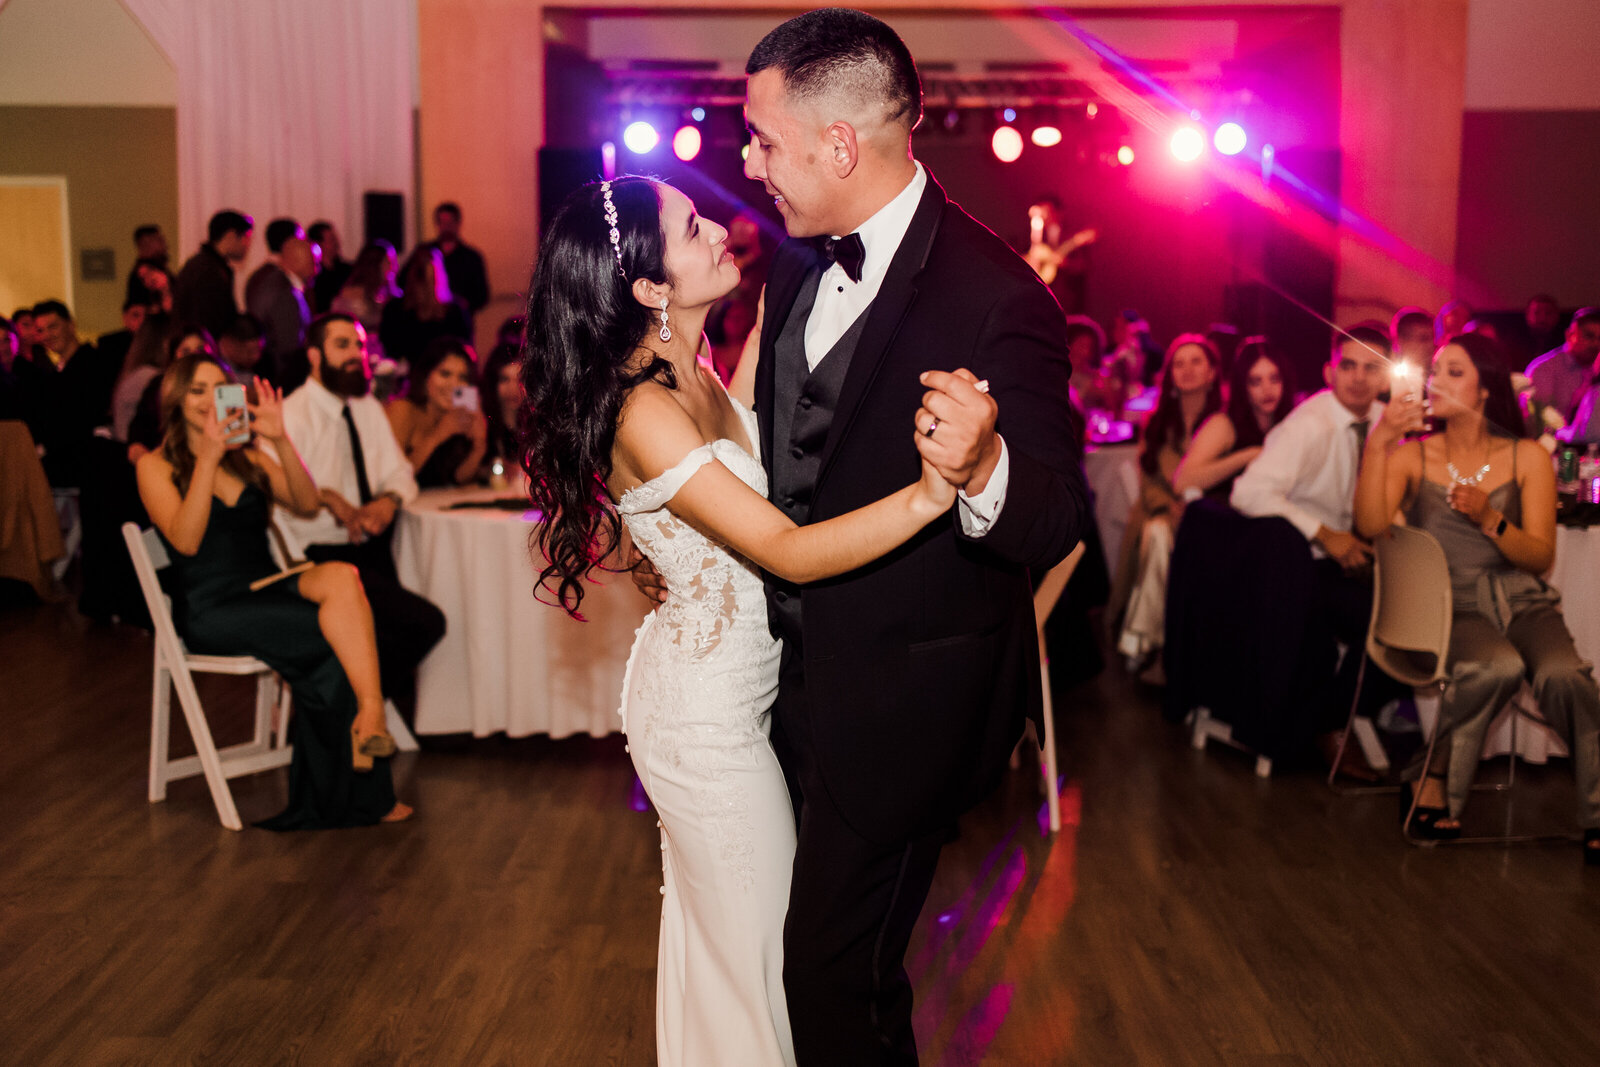 First Dance for Bride and Groom at their reception in Fullerton Community Center